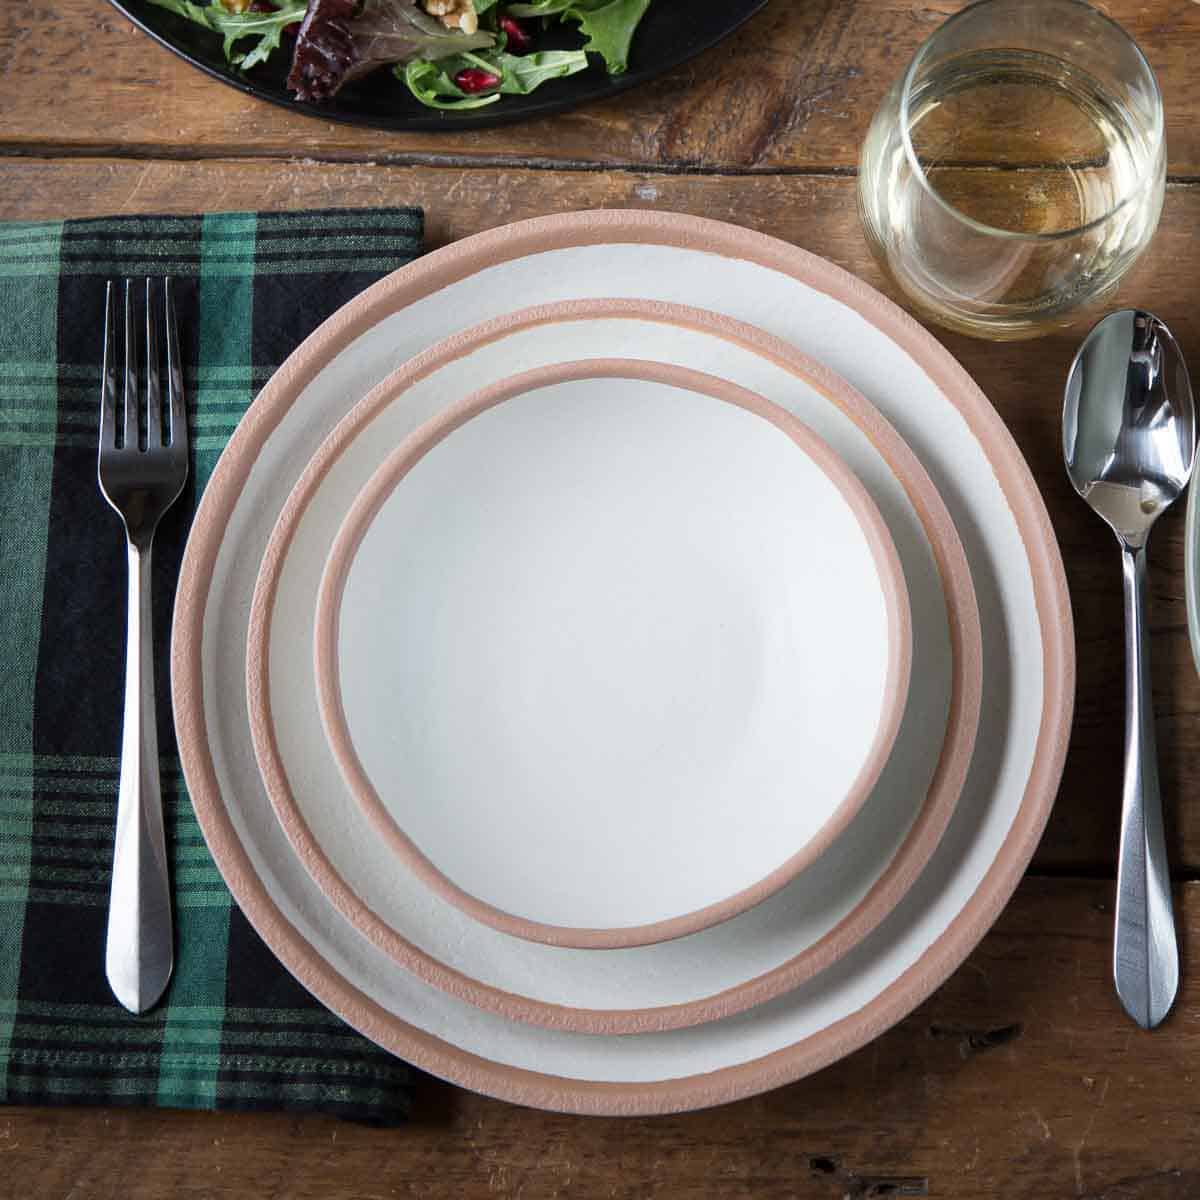 matching plates and bowl on a wooden table with a plaid napkin and silverware.